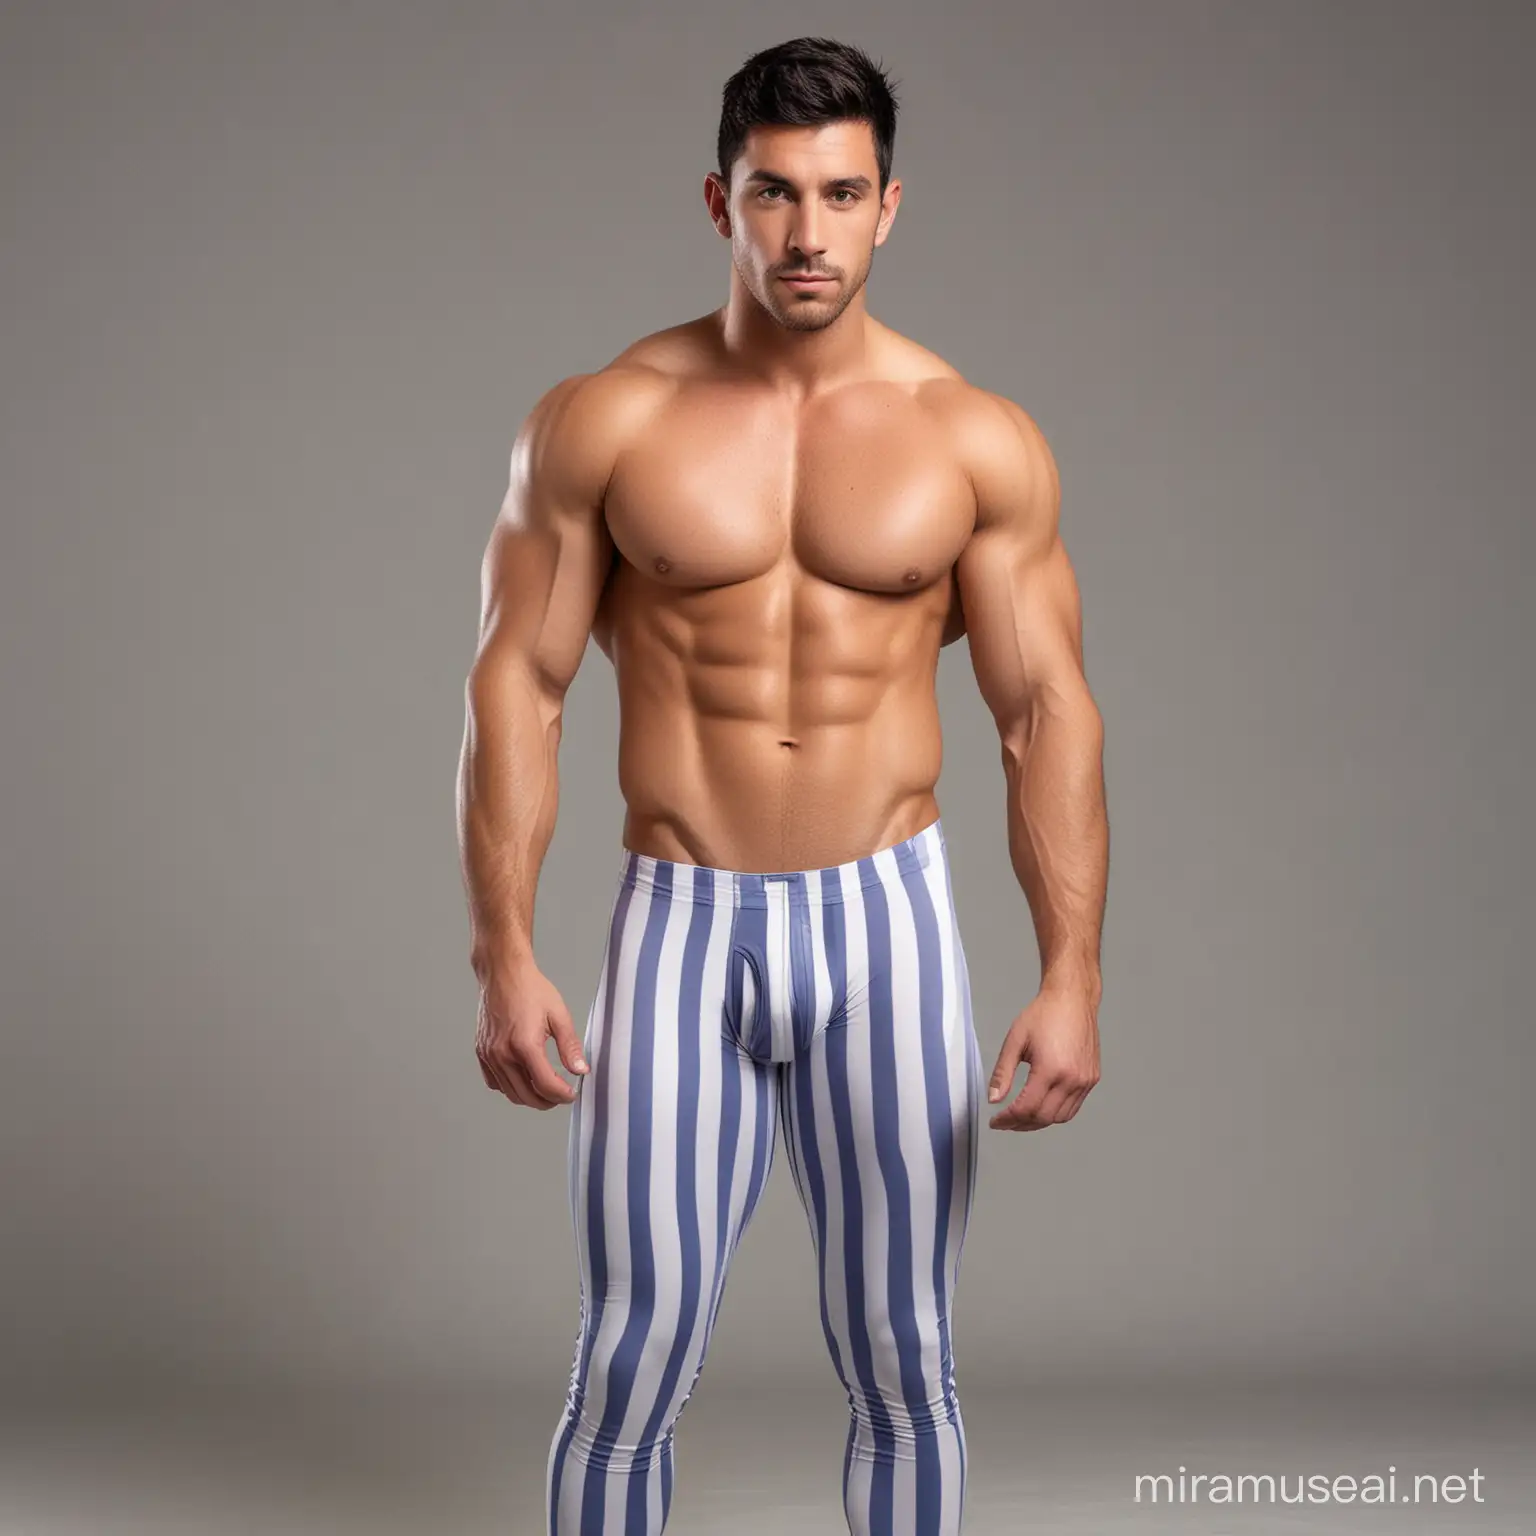 Charming shirtless muscular 28 year old male Argentine man, with short black hair, slight tanned skin; no-facial beard; wearing long periwinkle spandex leggings (with vertical white stripes), prominent calves and buttocks, rear view